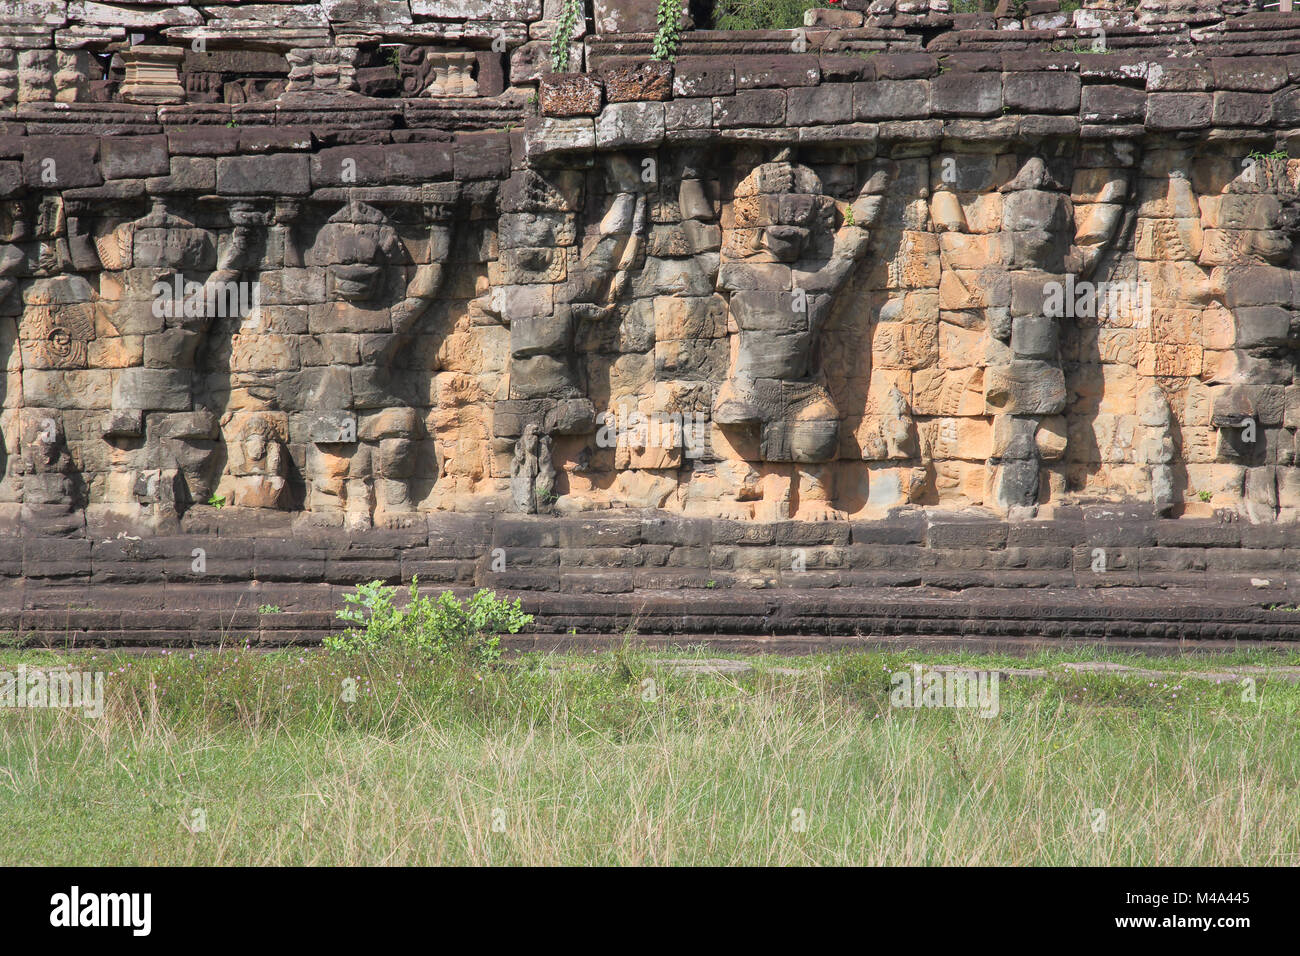 terrace of the leper king in the ancient city of angkor thom near siem reap cambodia Stock Photo